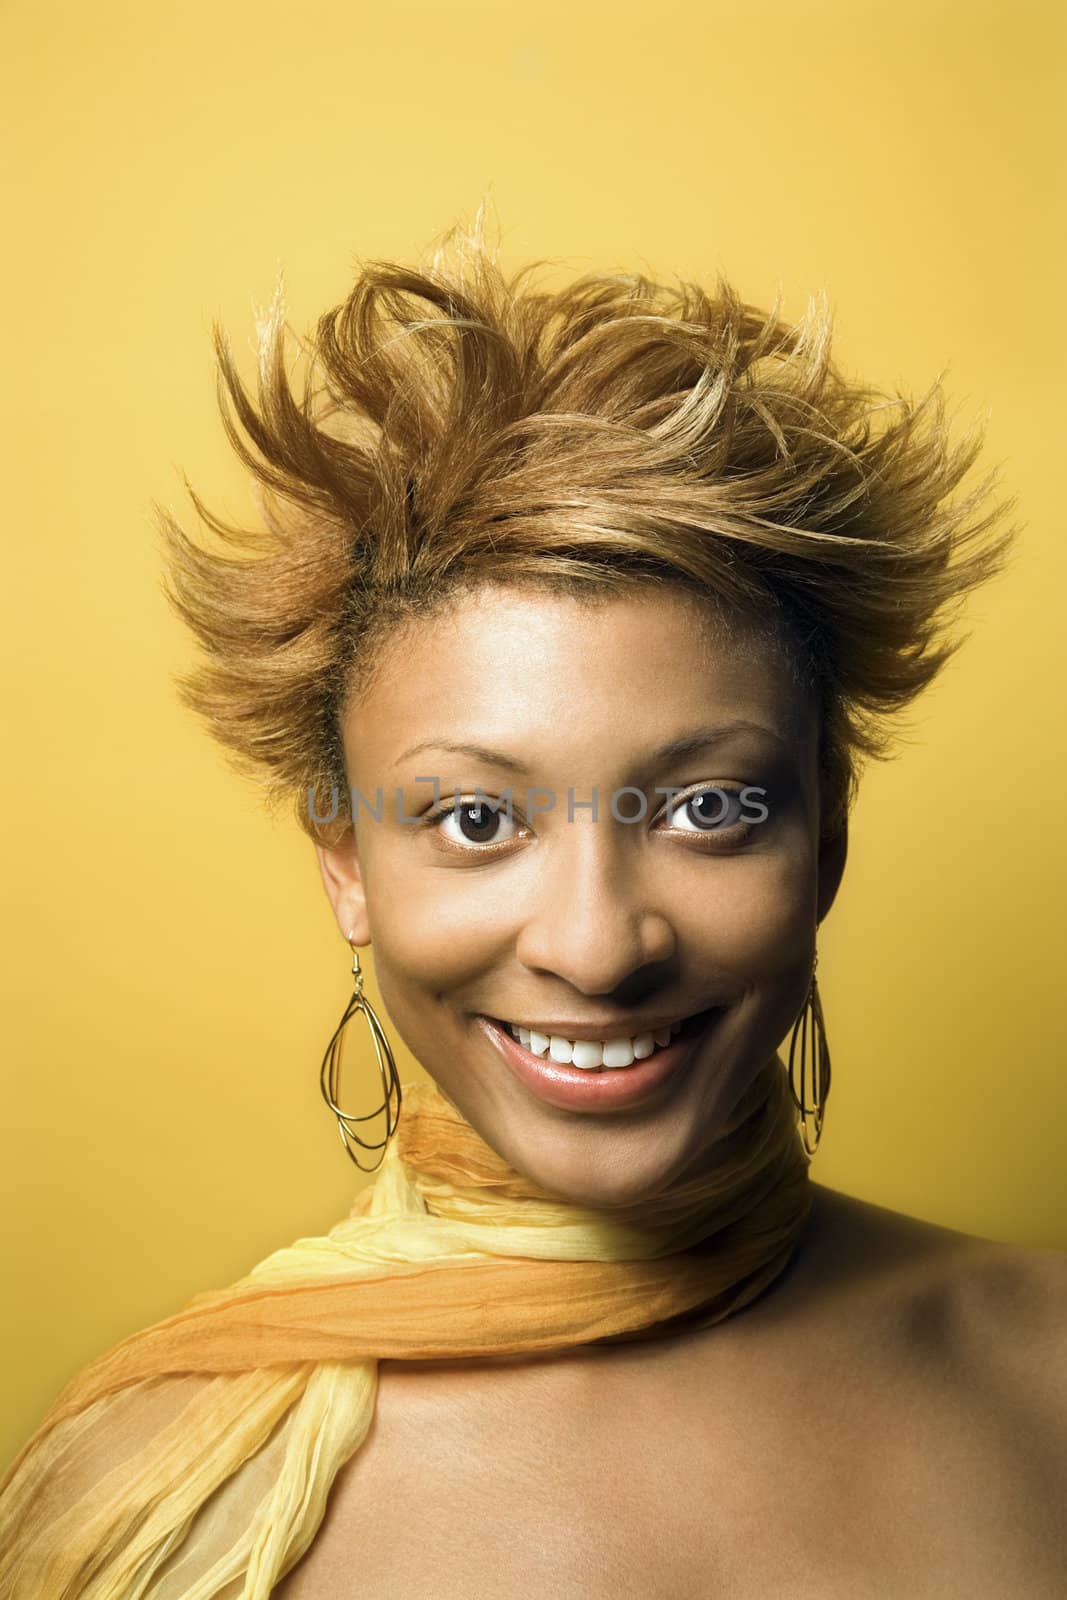 Head and shoulder portrait of smiling young African-American adult woman on yellow background.